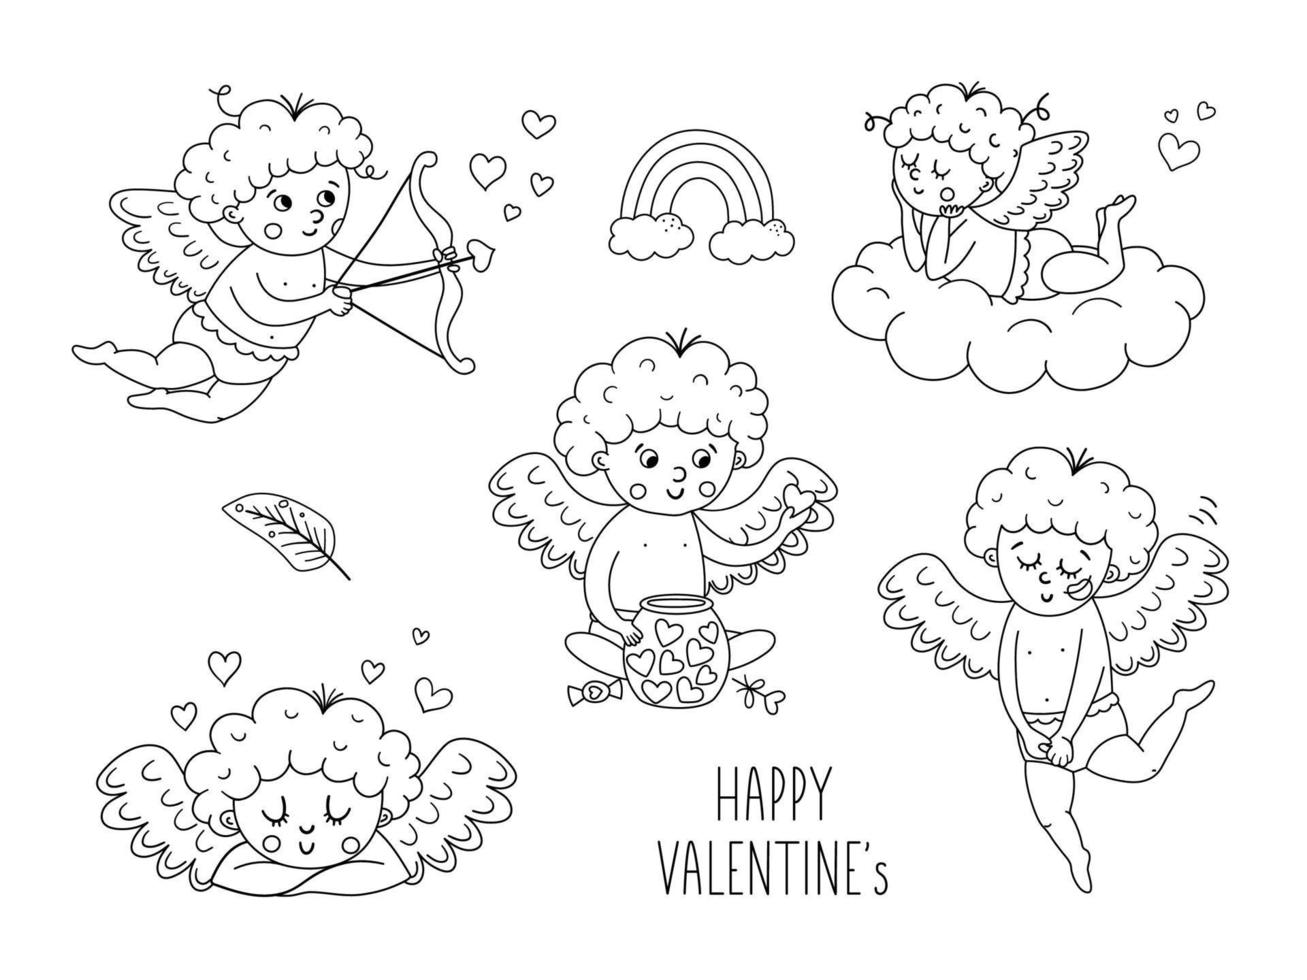 Vector collection of cute black and white cupids. Set with funny outline Valentine day characters. Line art love angels with wings, bow and arrow, lying on a cloud. Playful cherubs pack